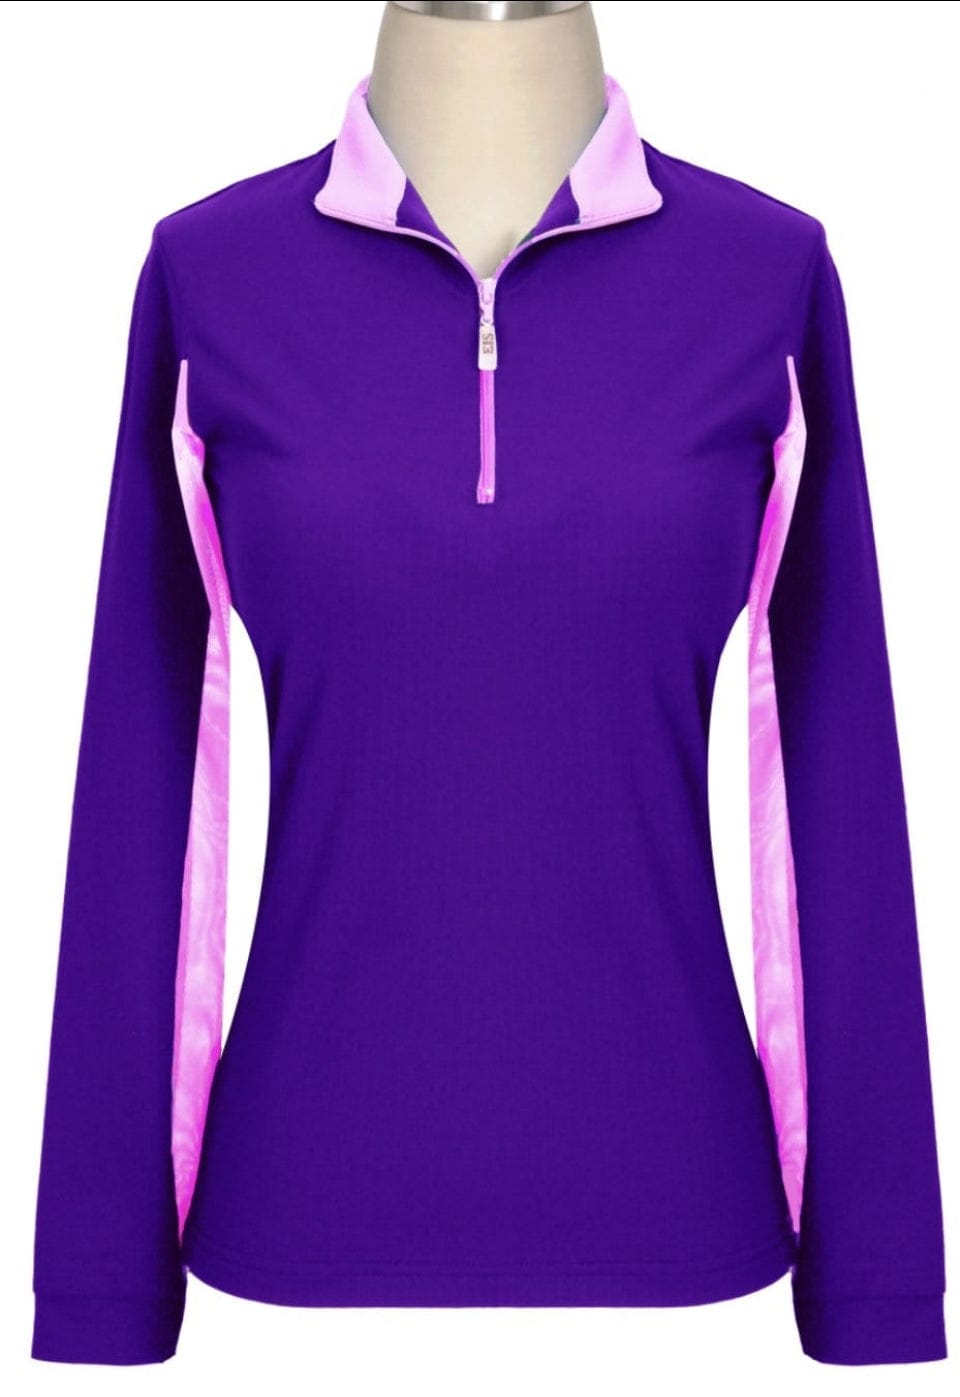 EIS Custom Team Shirts Purple/Light Pink EIS- Sunshirts S equestrian team apparel online tack store mobile tack store custom farm apparel custom show stable clothing equestrian lifestyle horse show clothing riding clothes horses equestrian tack store